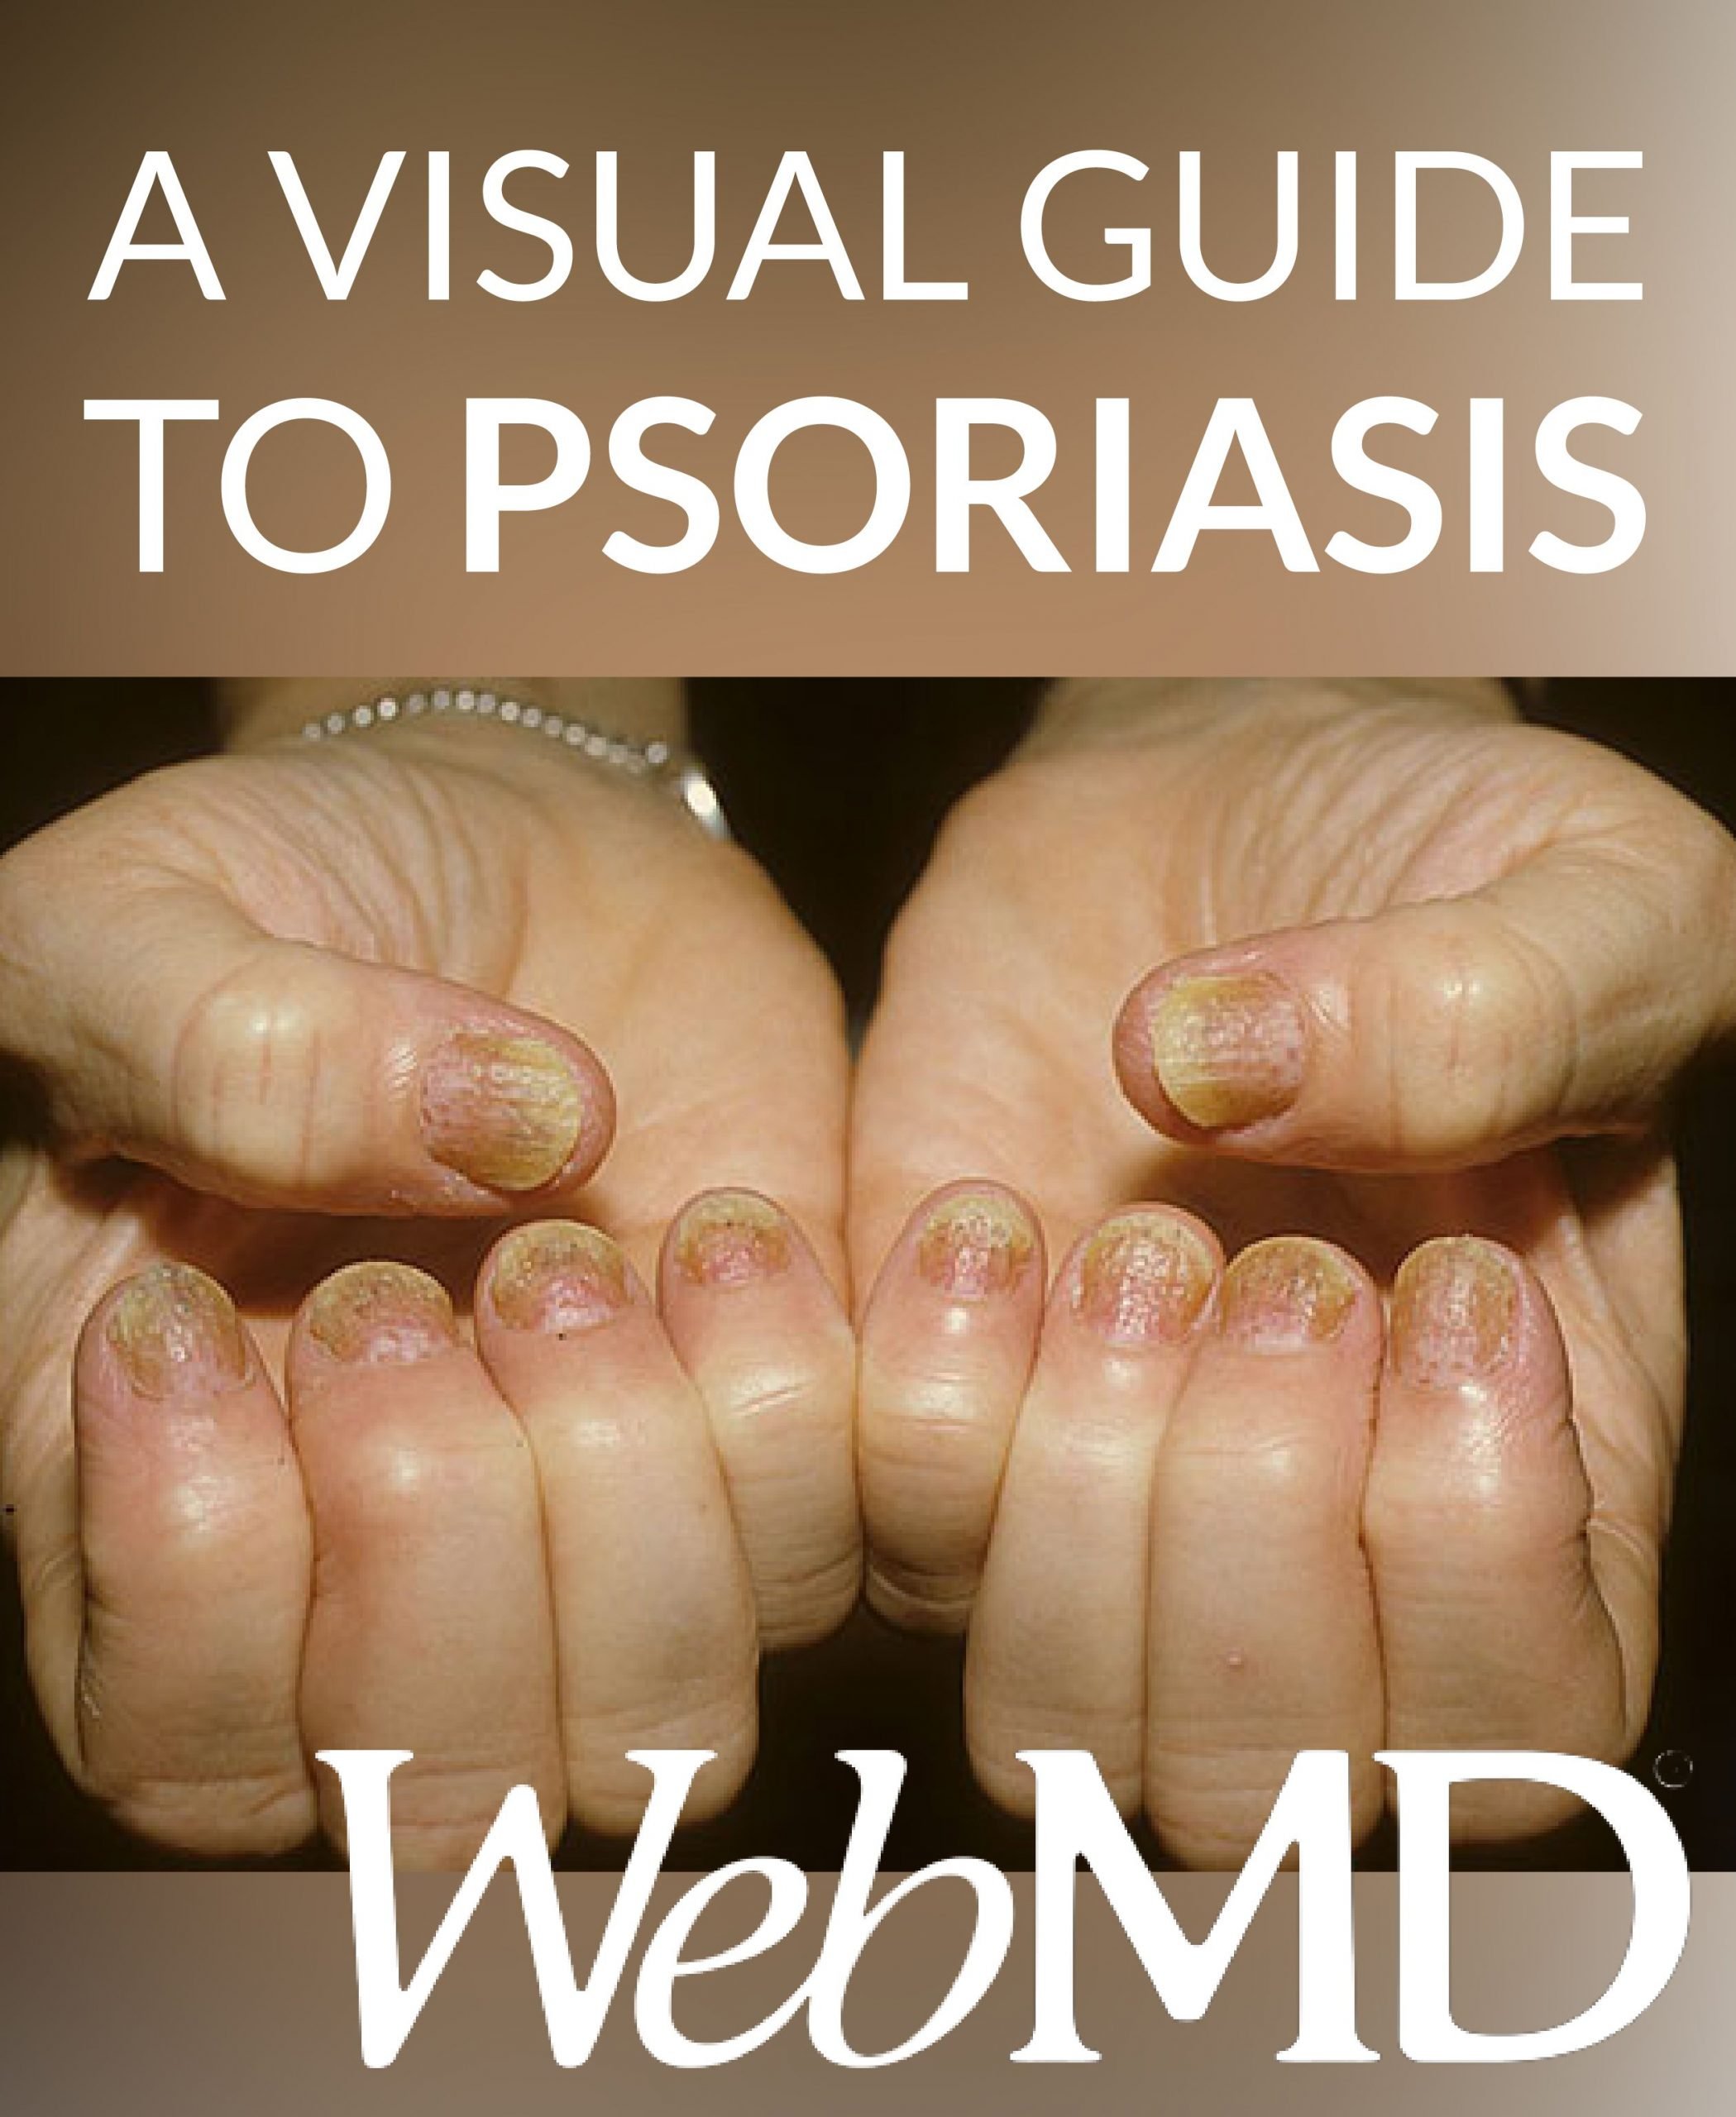 Psoriasis Pictures: A Visual Guide To Psoriasis on Skin, Nails, and ...